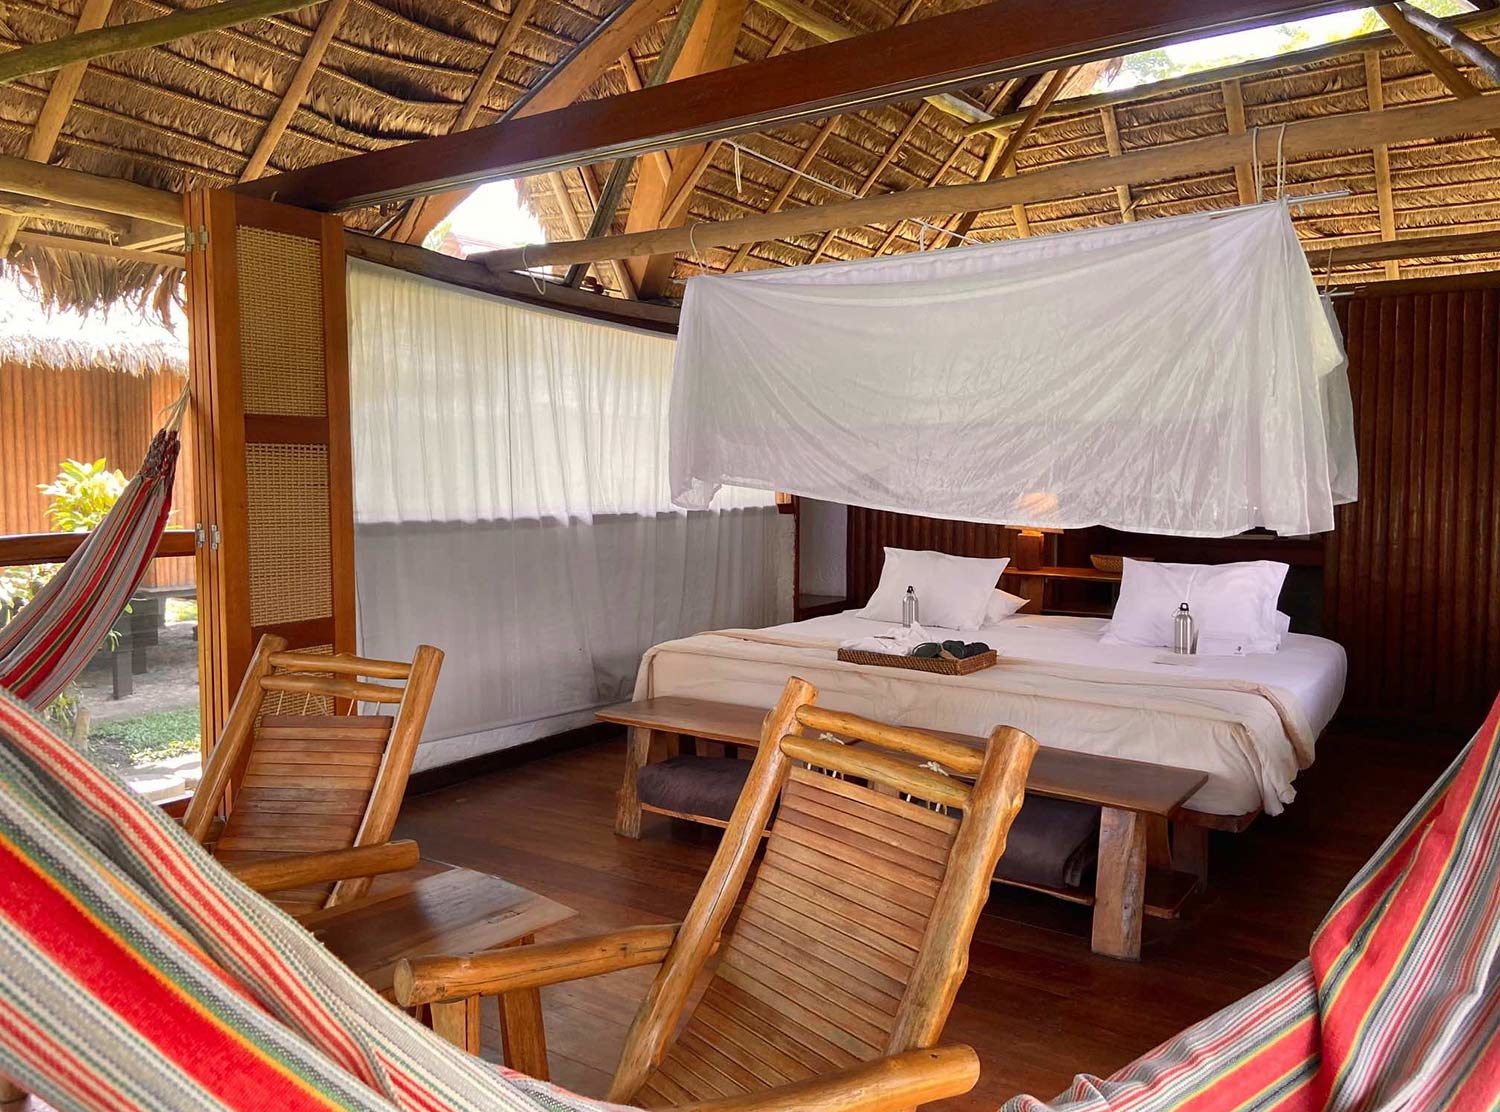 Inkaterra Reserva Amazonica High thatched roof wooden cabanas with king bed (or twin beds) with canopy mosquito net, 100% cotton sheets and hypoallergenic pillows